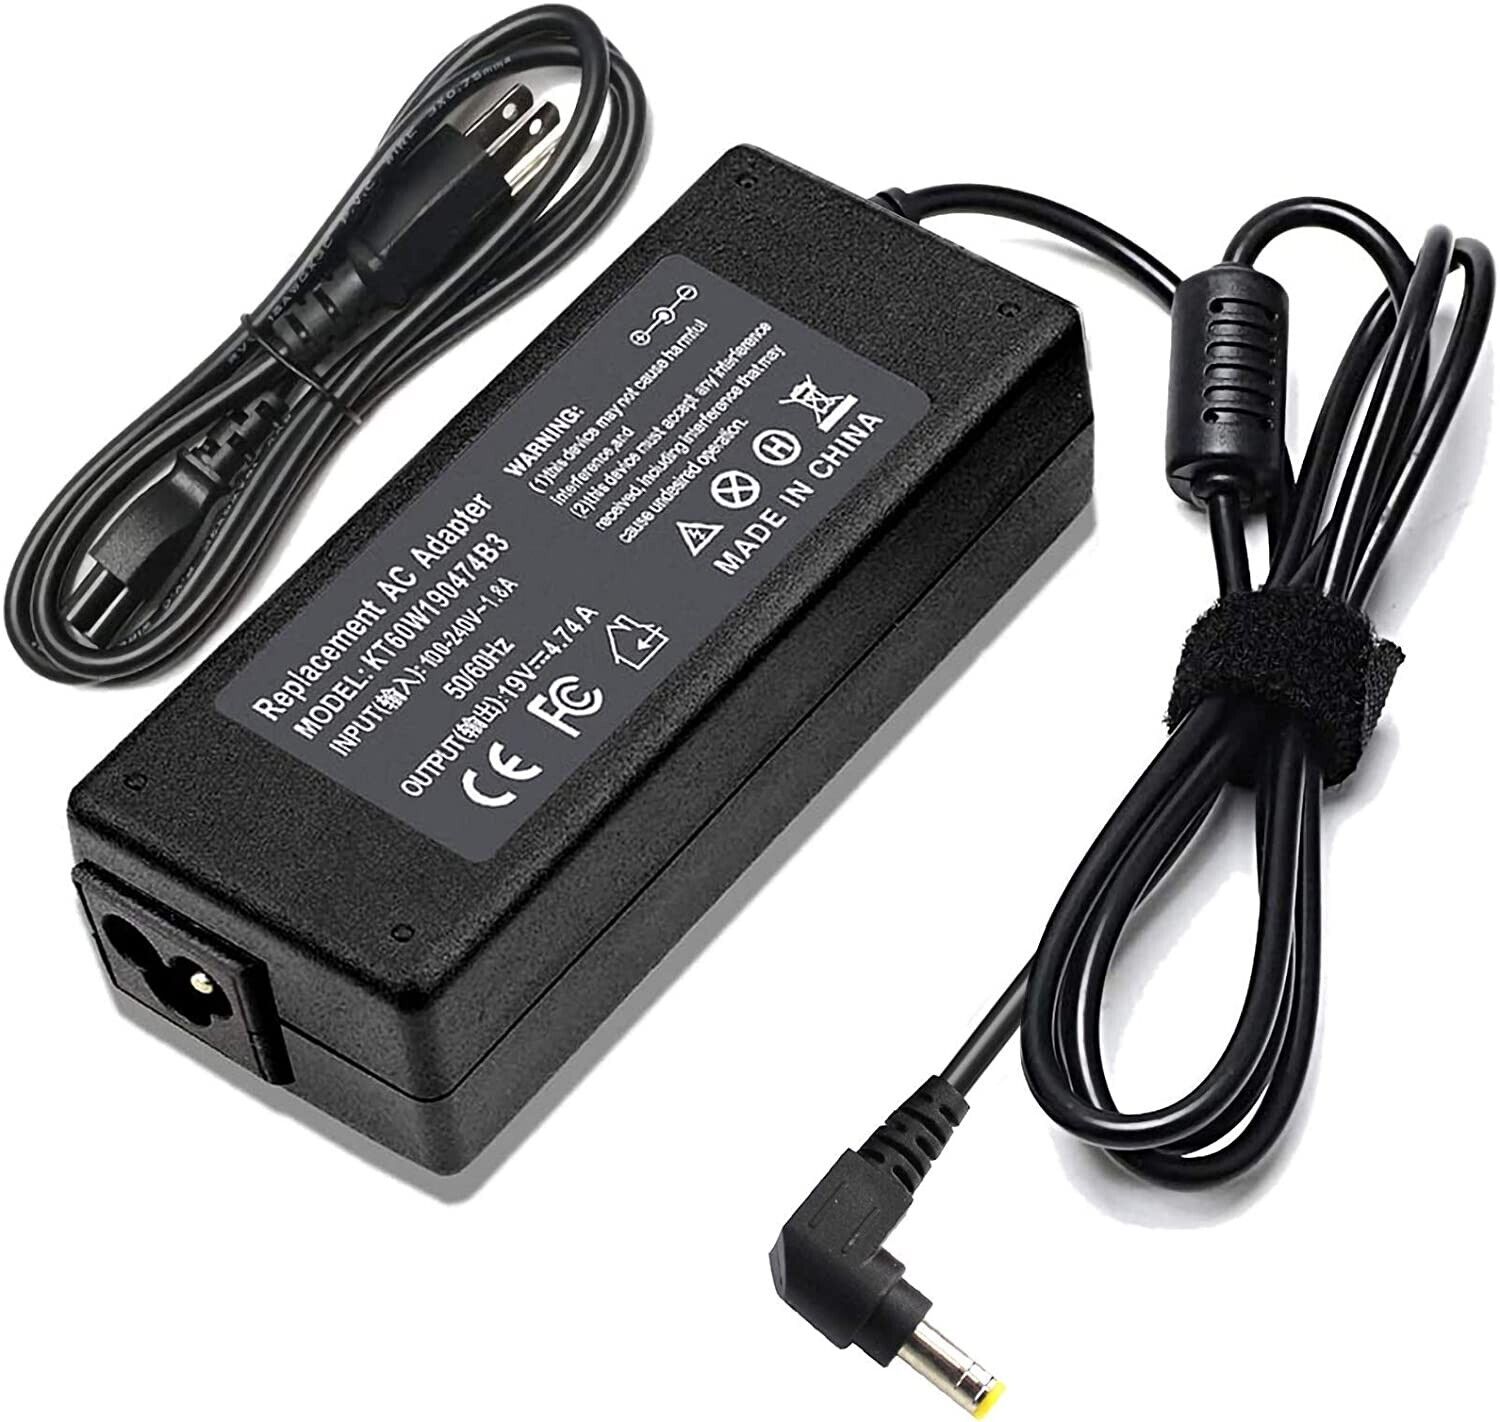 AC Adapter Charger For Toshiba Satellite L305-S5875, L305-S5876, L305-S5877